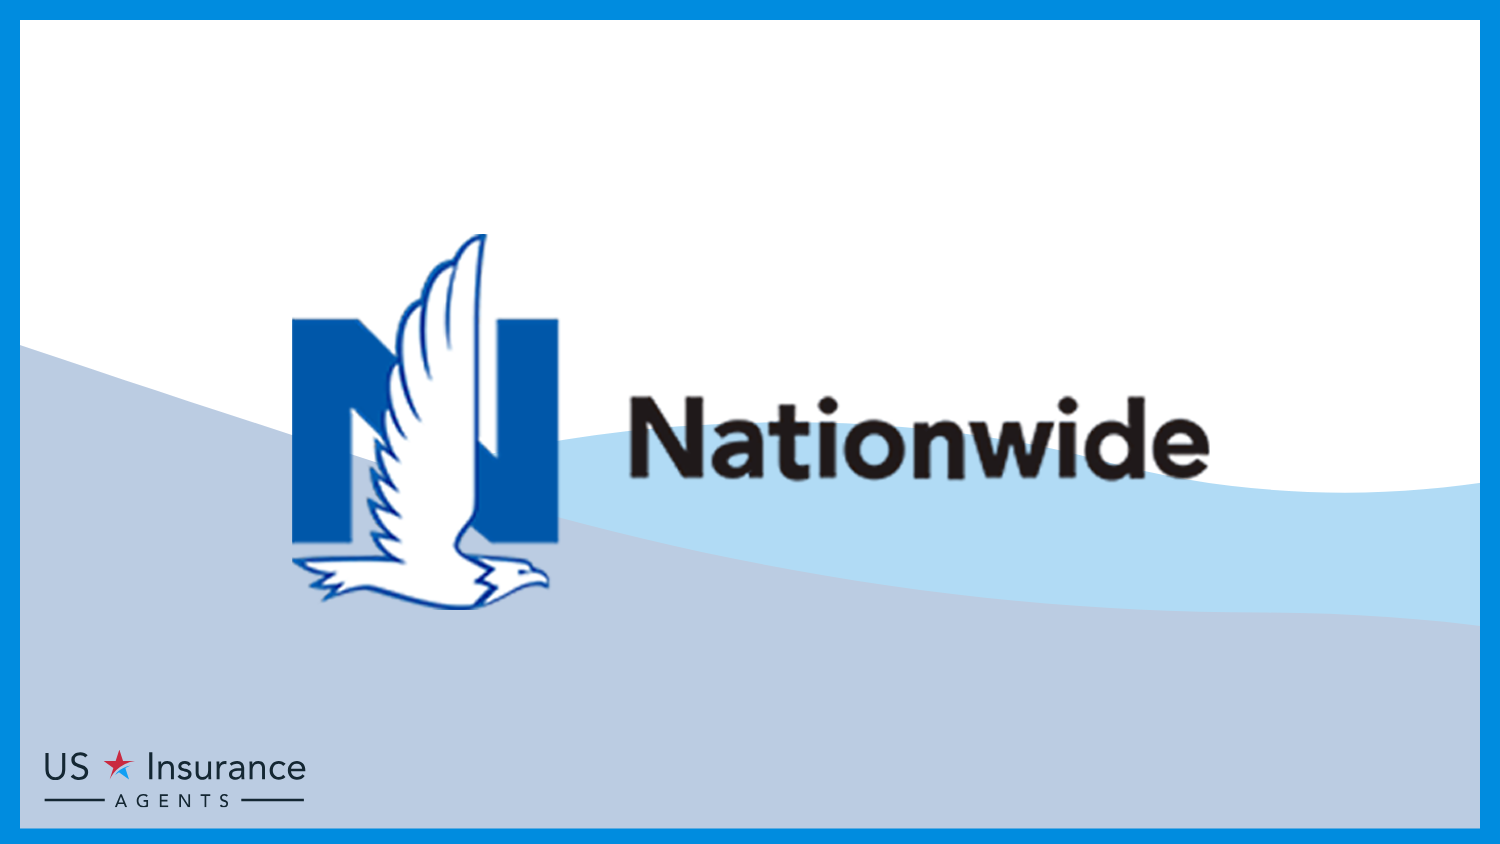 Nationwide: Best Business Insurance for Beekeepers